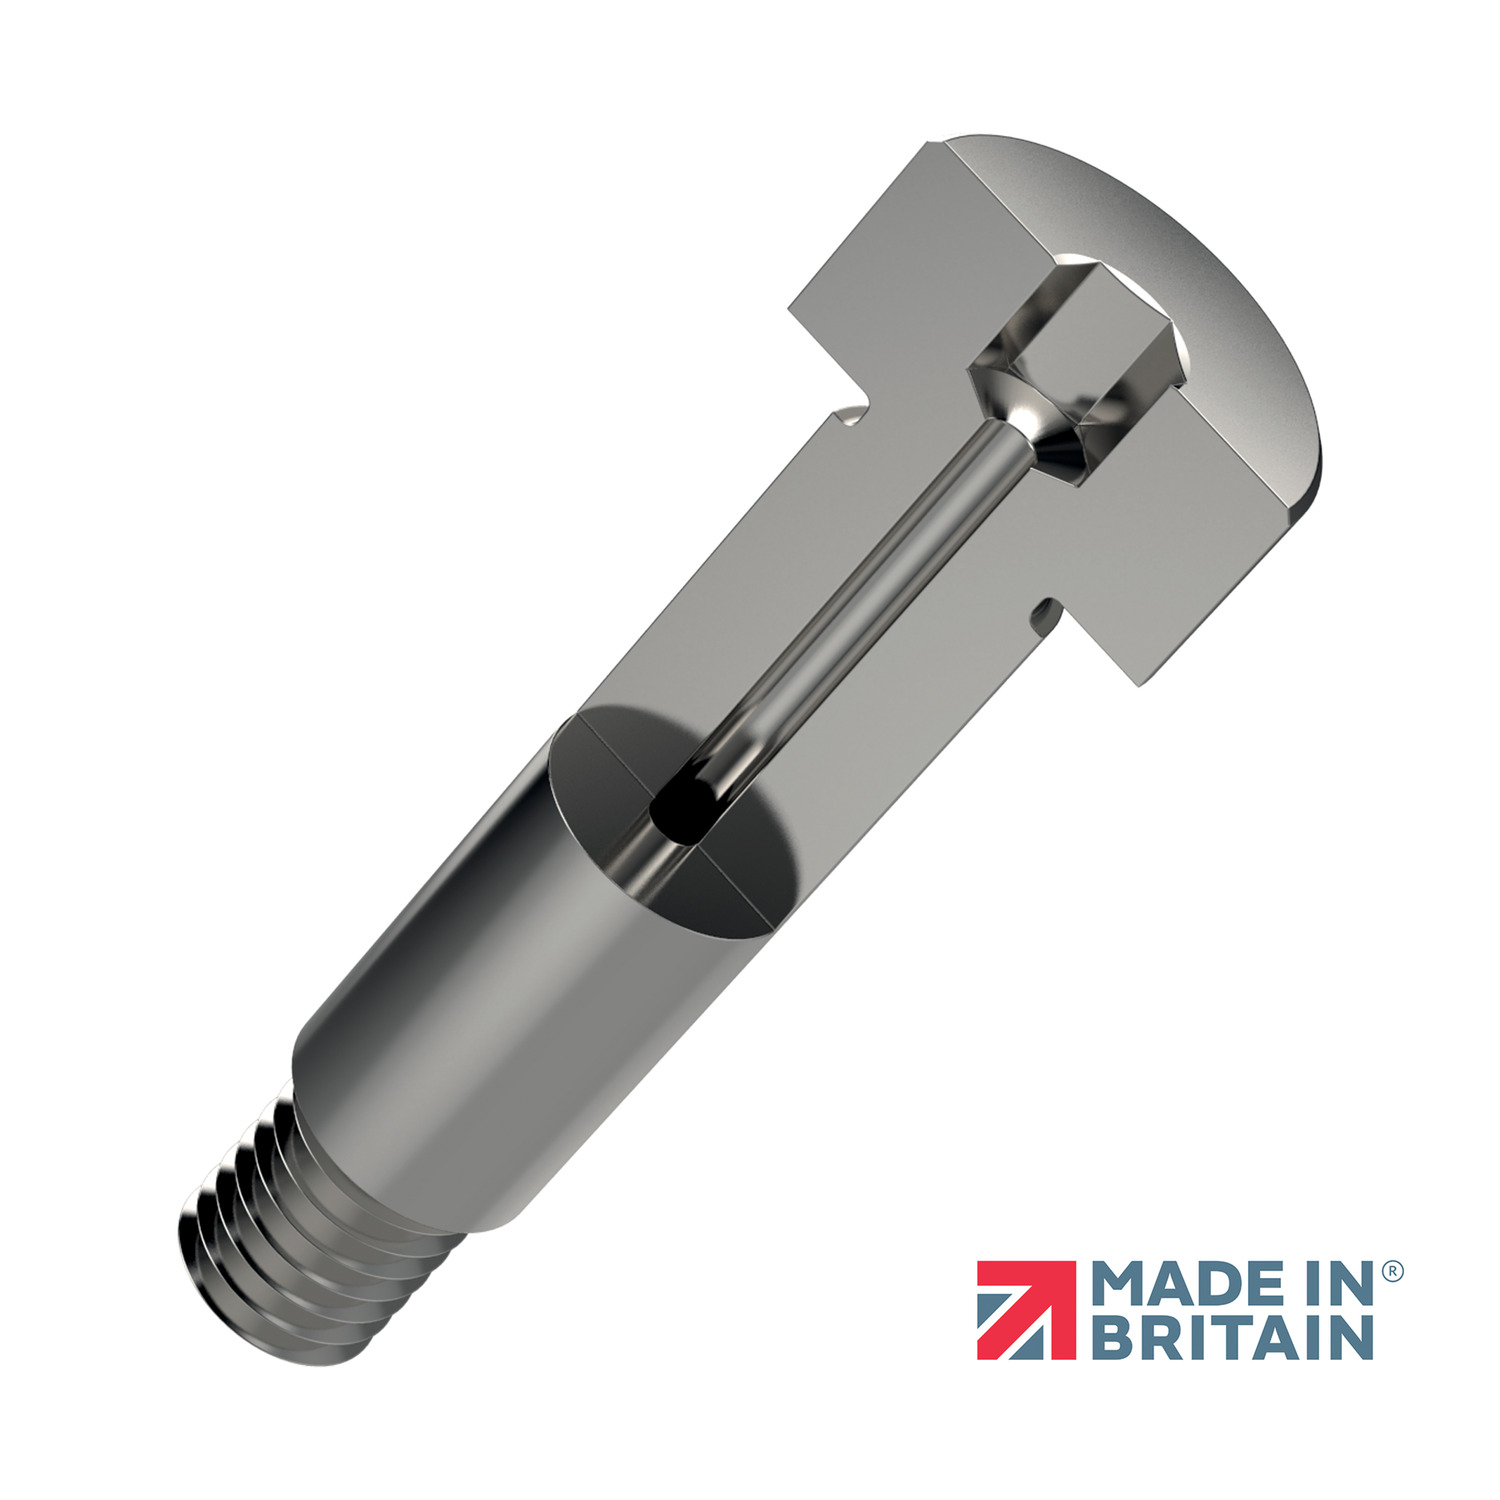 Vented Shoulder Screws - Cap Head Vented shoulder screws are ideal for attaching panels with precision alignment whilst also allowing trapped air to escape from the bottom of the hole. Shown here in AISI 316 series stainless steel but also available in 303 series stainless steel.